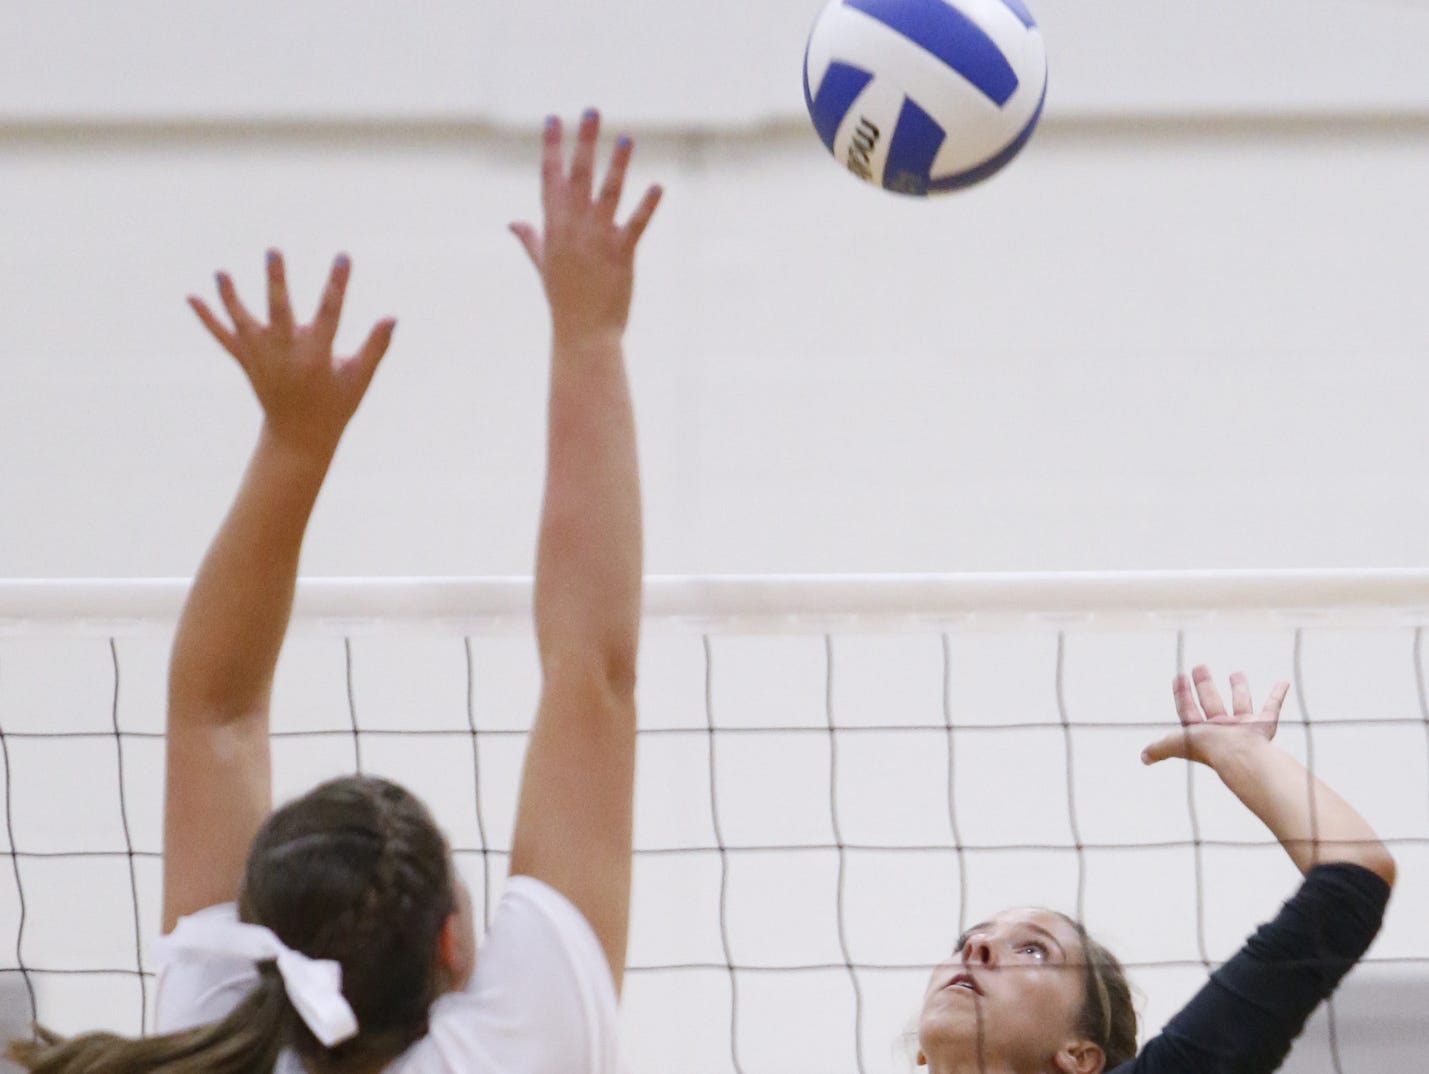 Padua's Claire Bisson hits in the second game of Padua's 3-0 win at Wilmington Friends on Thursday.